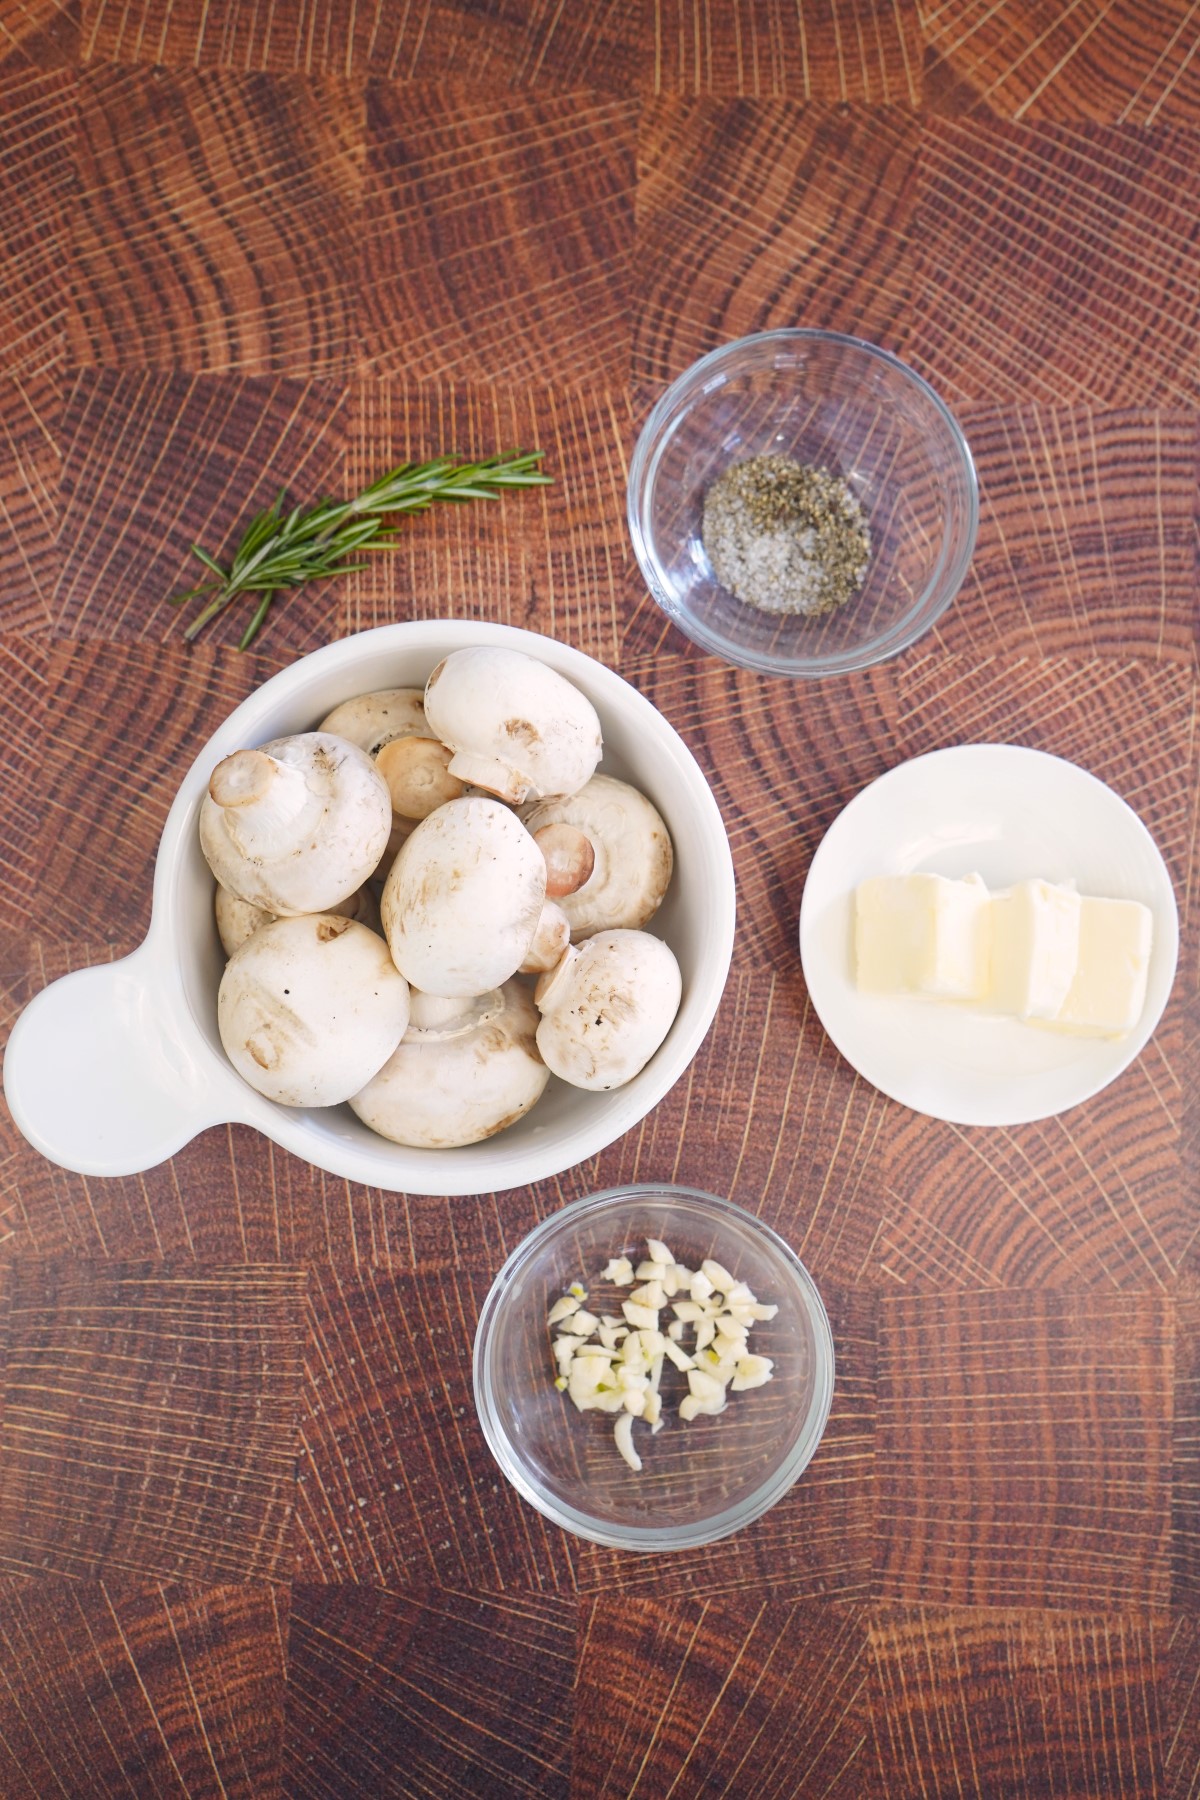 Ingredients to make Rosemary Smoked Mushrooms in small glass bowls on a wooden cutting board.